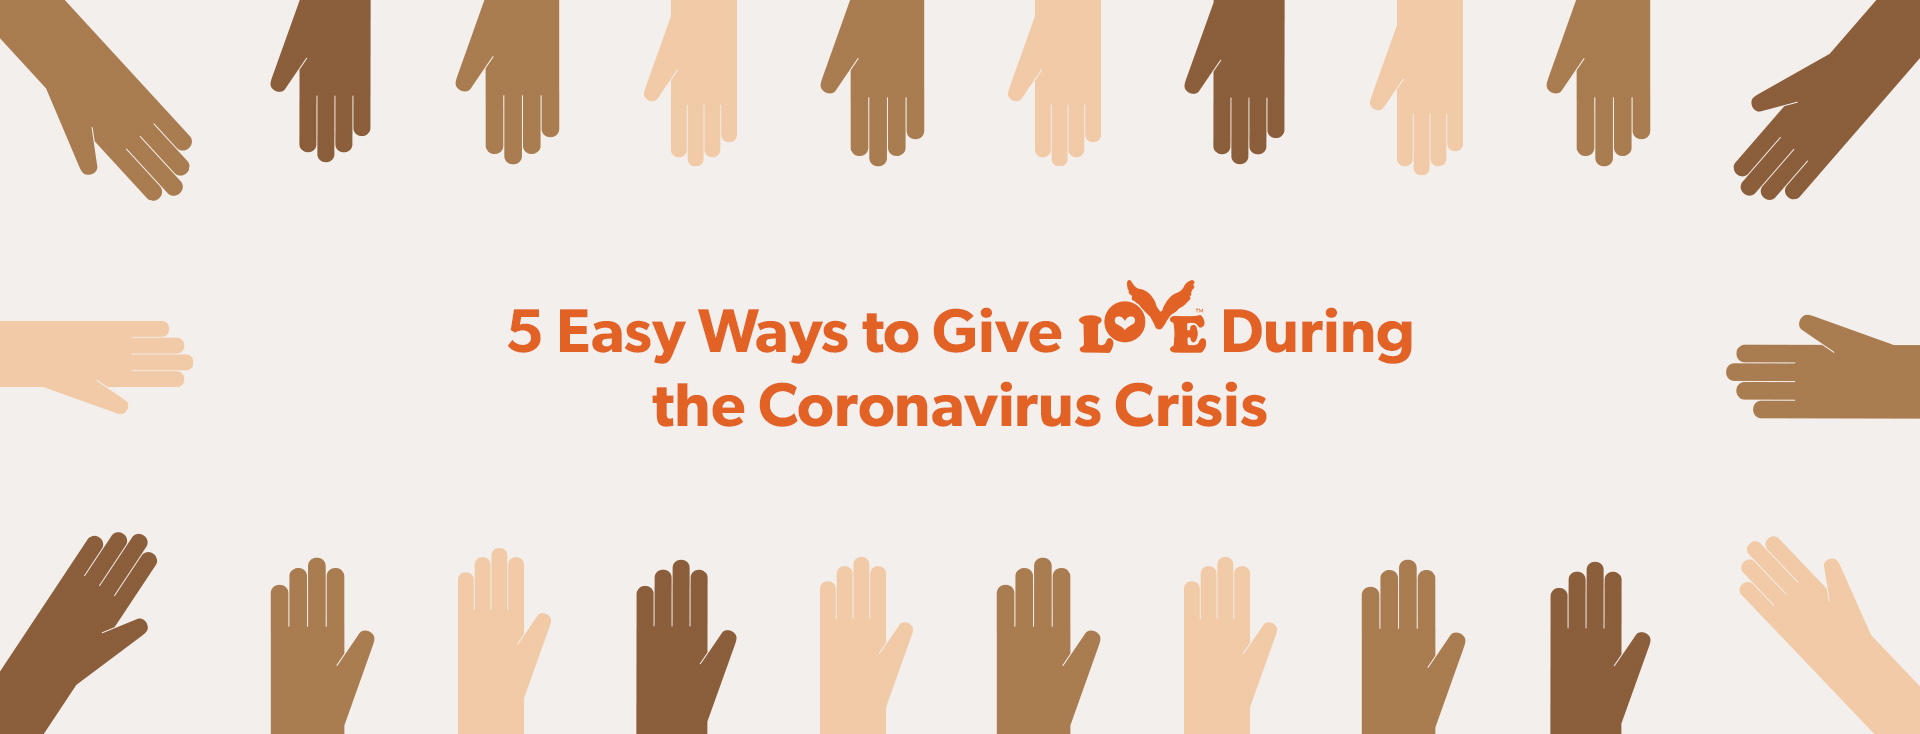 5 Easy Ways to Give Love During the Coronavirus Crisis